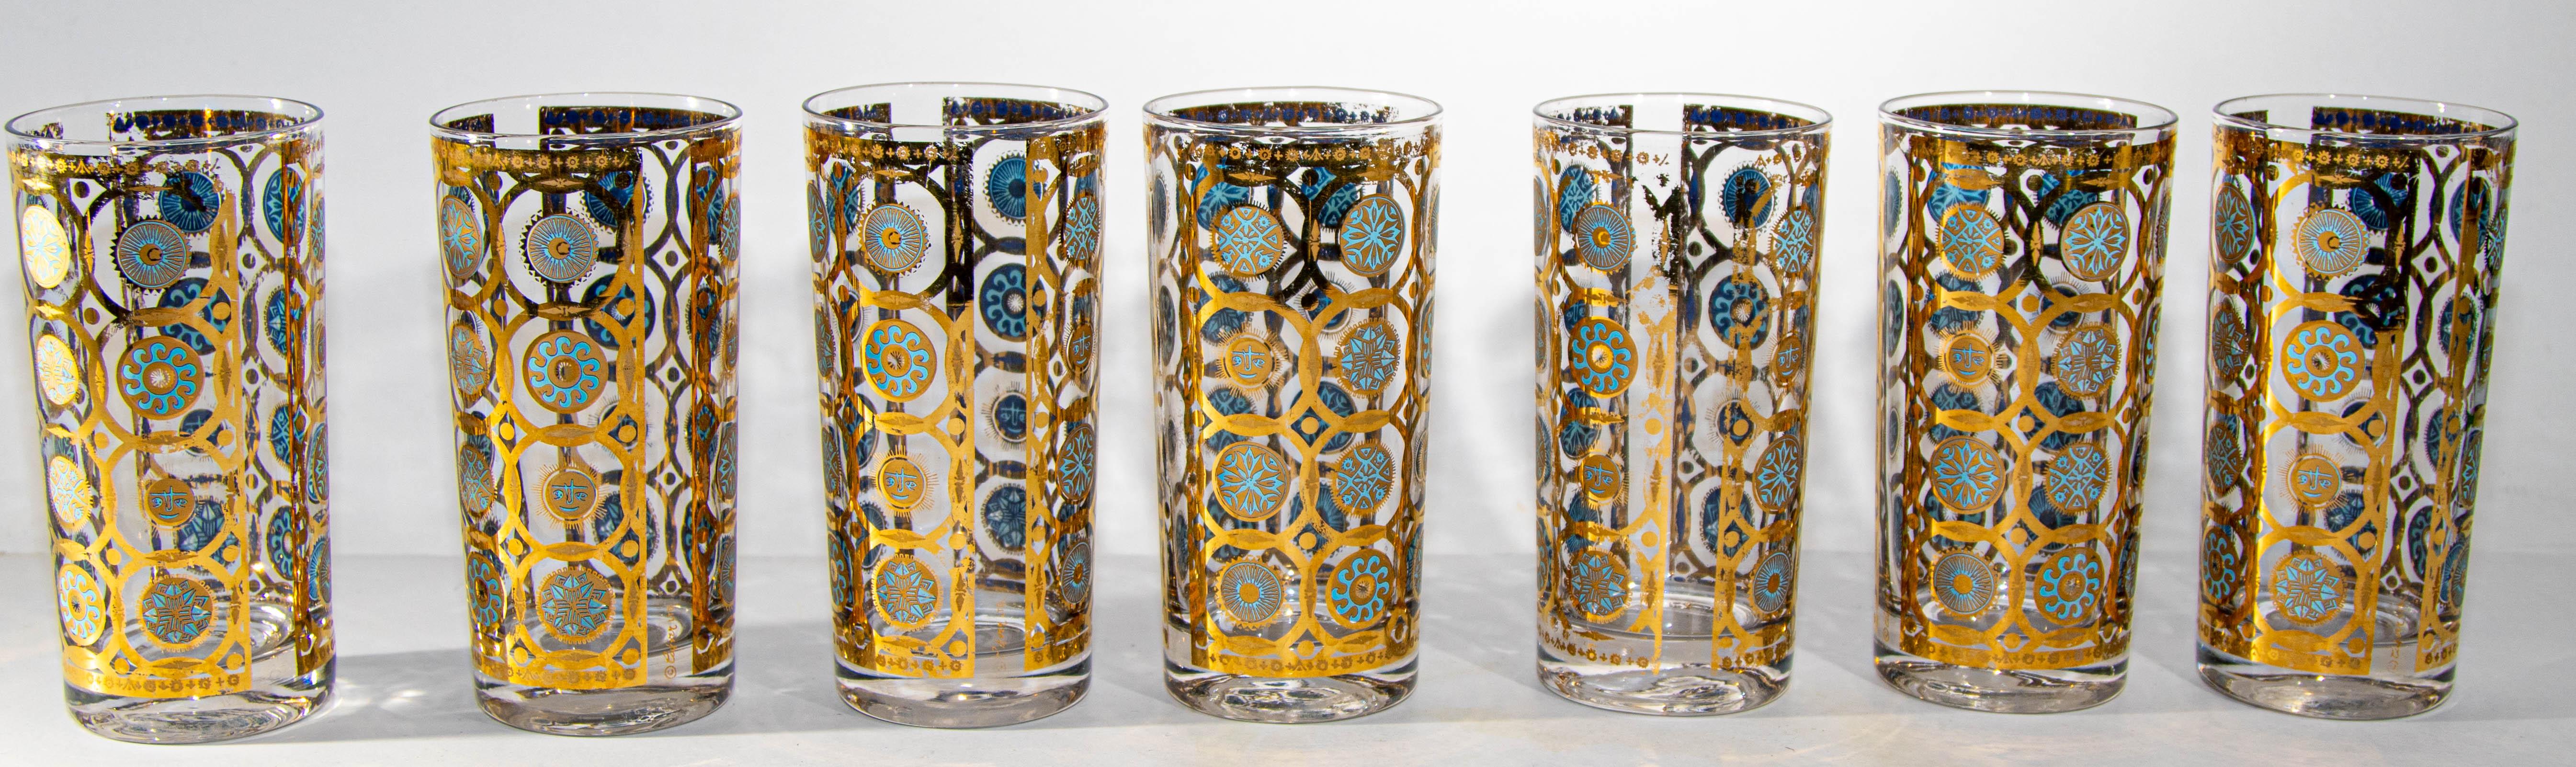 Culver Ltd 22k gold and turquoise signed 1960s glassware barware set of 7.
1960s midcentury culver Ltd glassware barware set highball drinking glasses in 